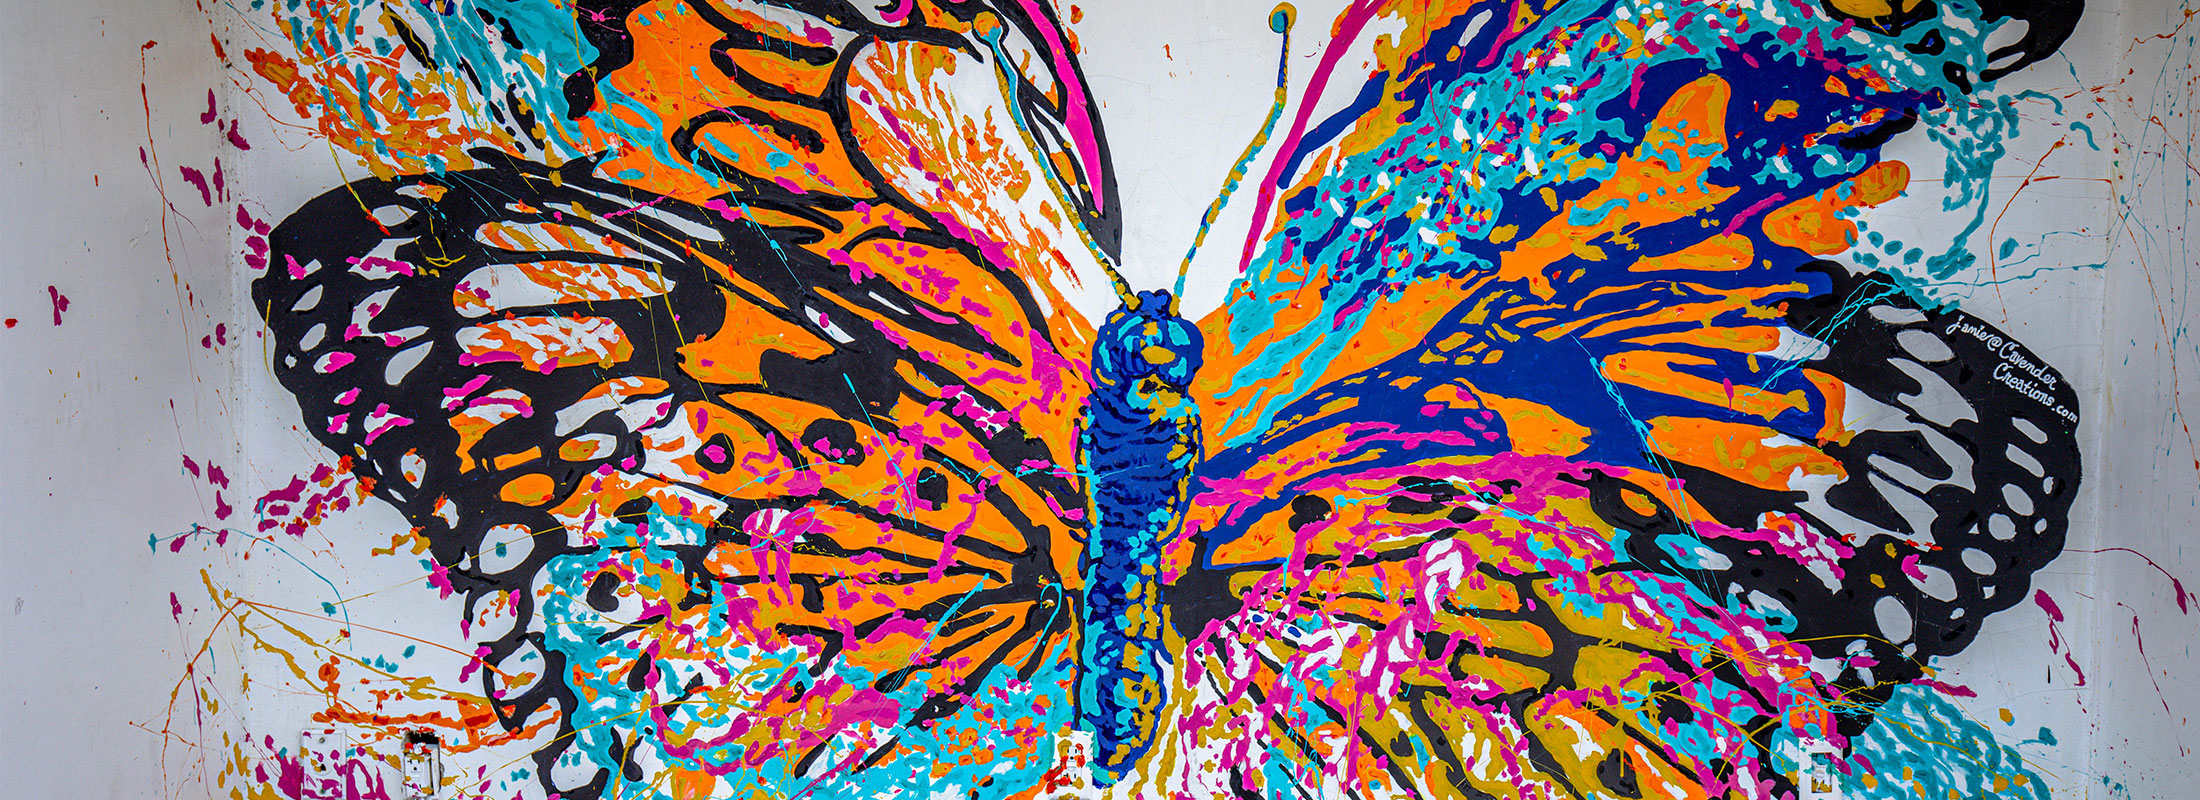 Butterfly painted on wall Photo by Martin Ferreira on Unsplash